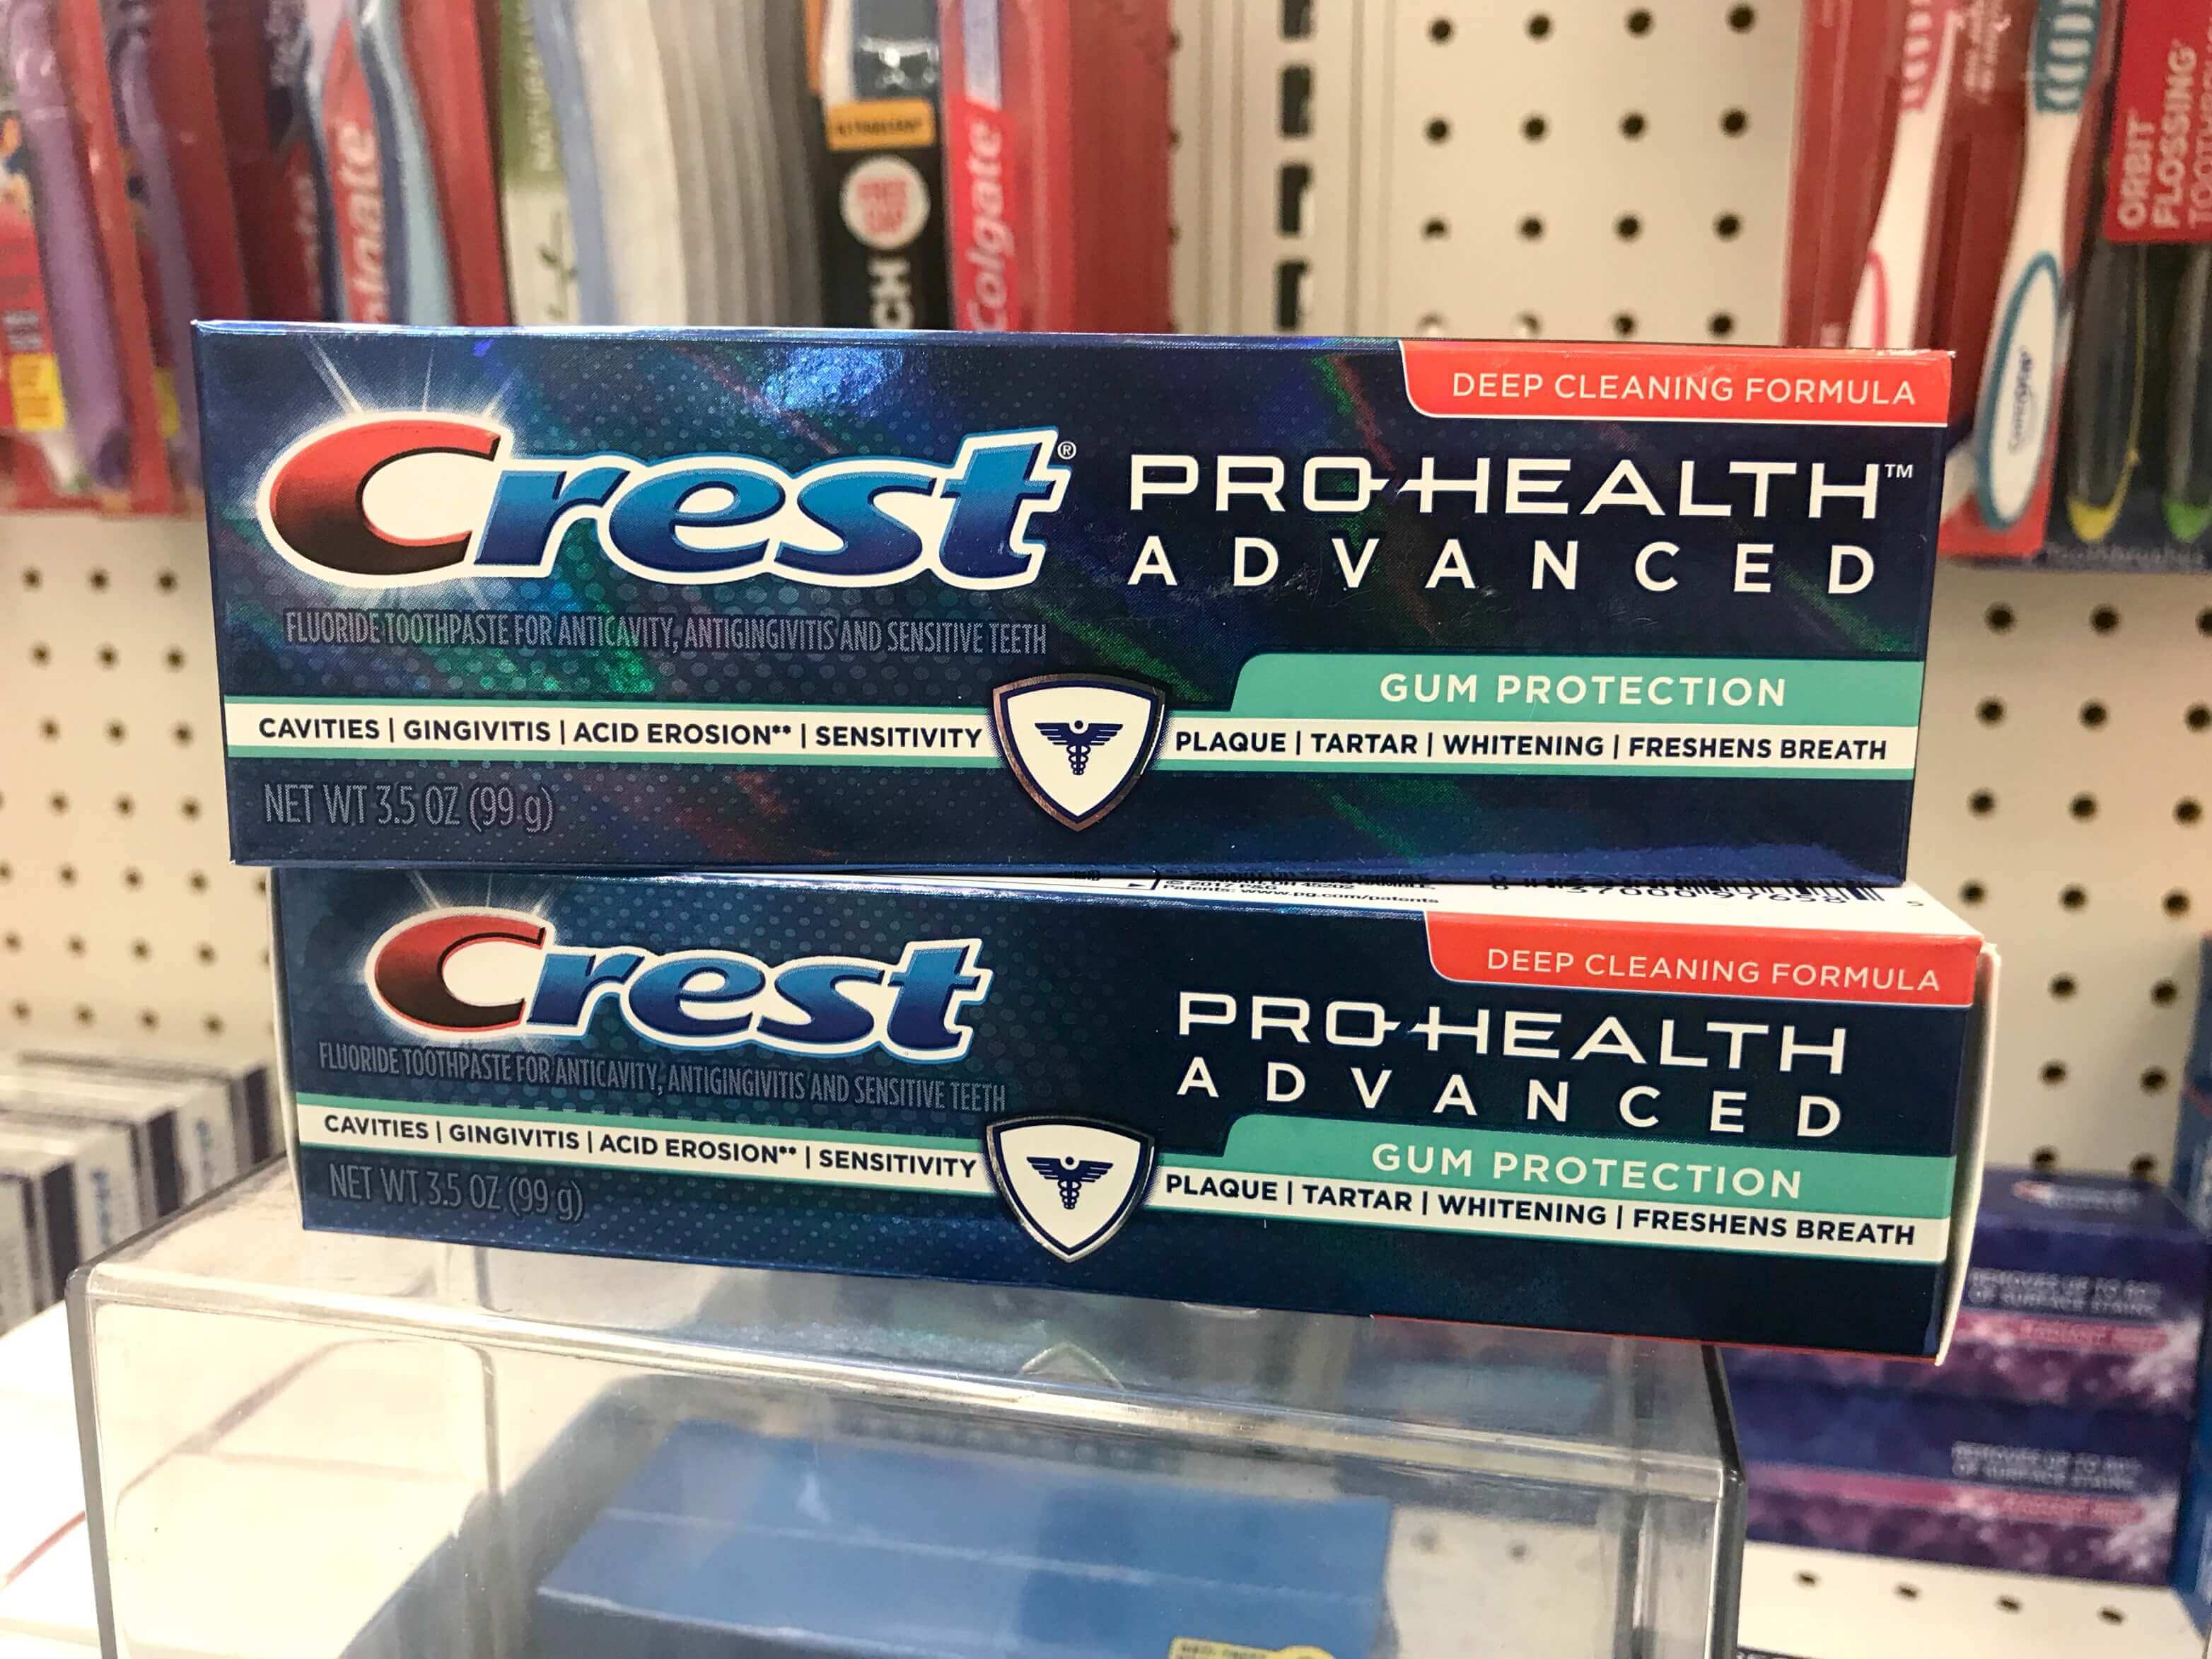 Crest Toothpaste, $0.50 at Walgreens! | Living Rich With Coupons®